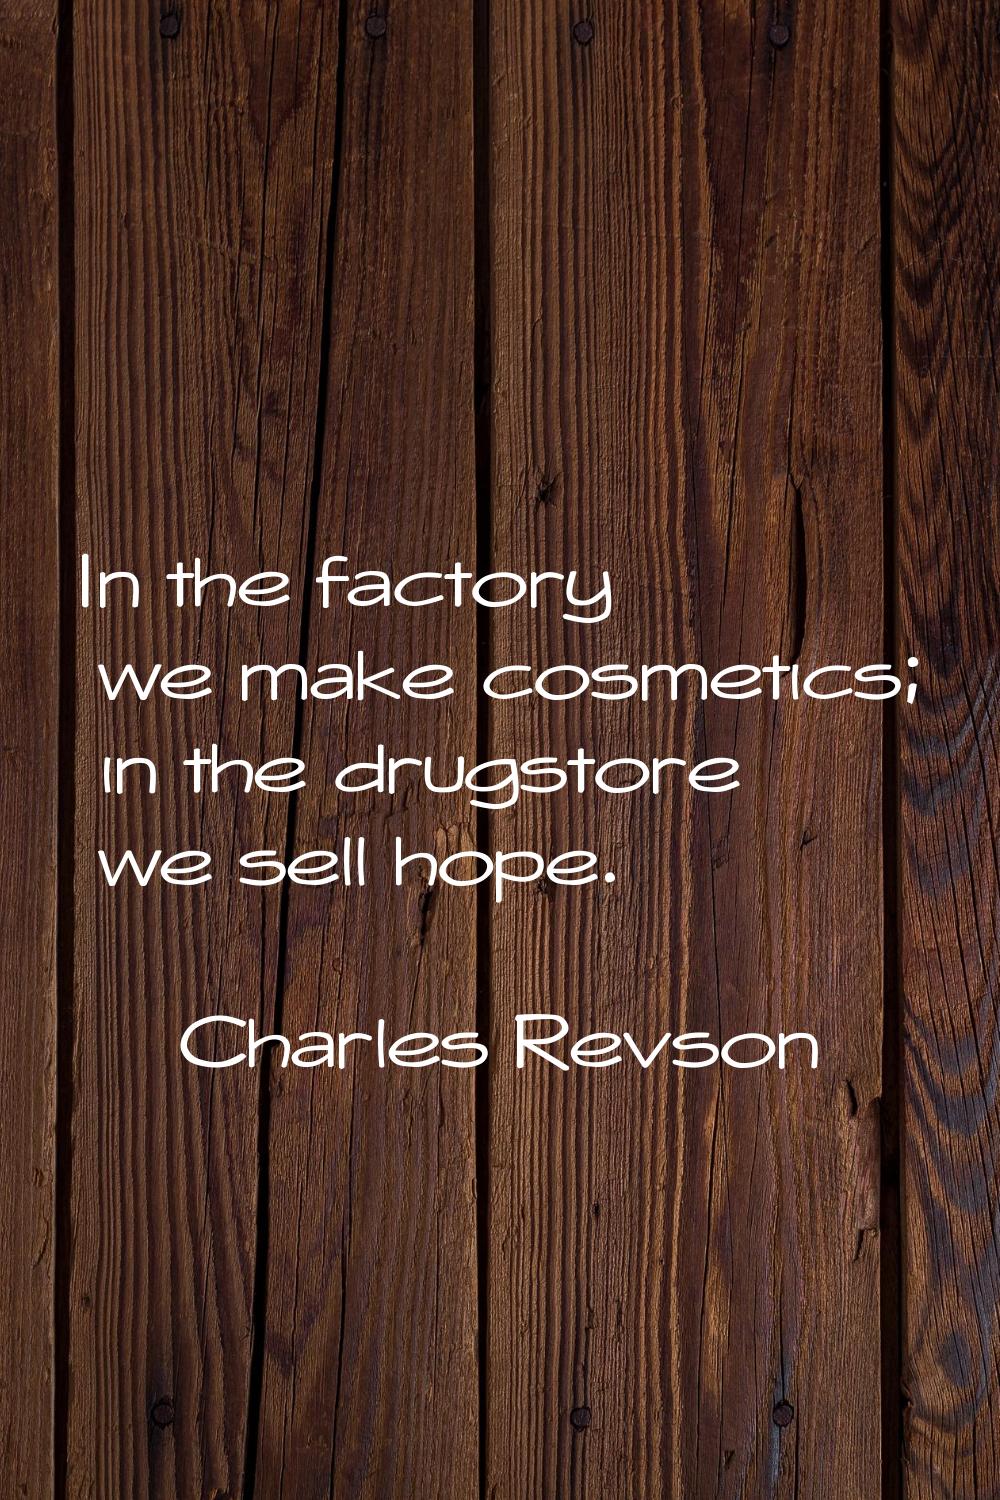 In the factory we make cosmetics; in the drugstore we sell hope.